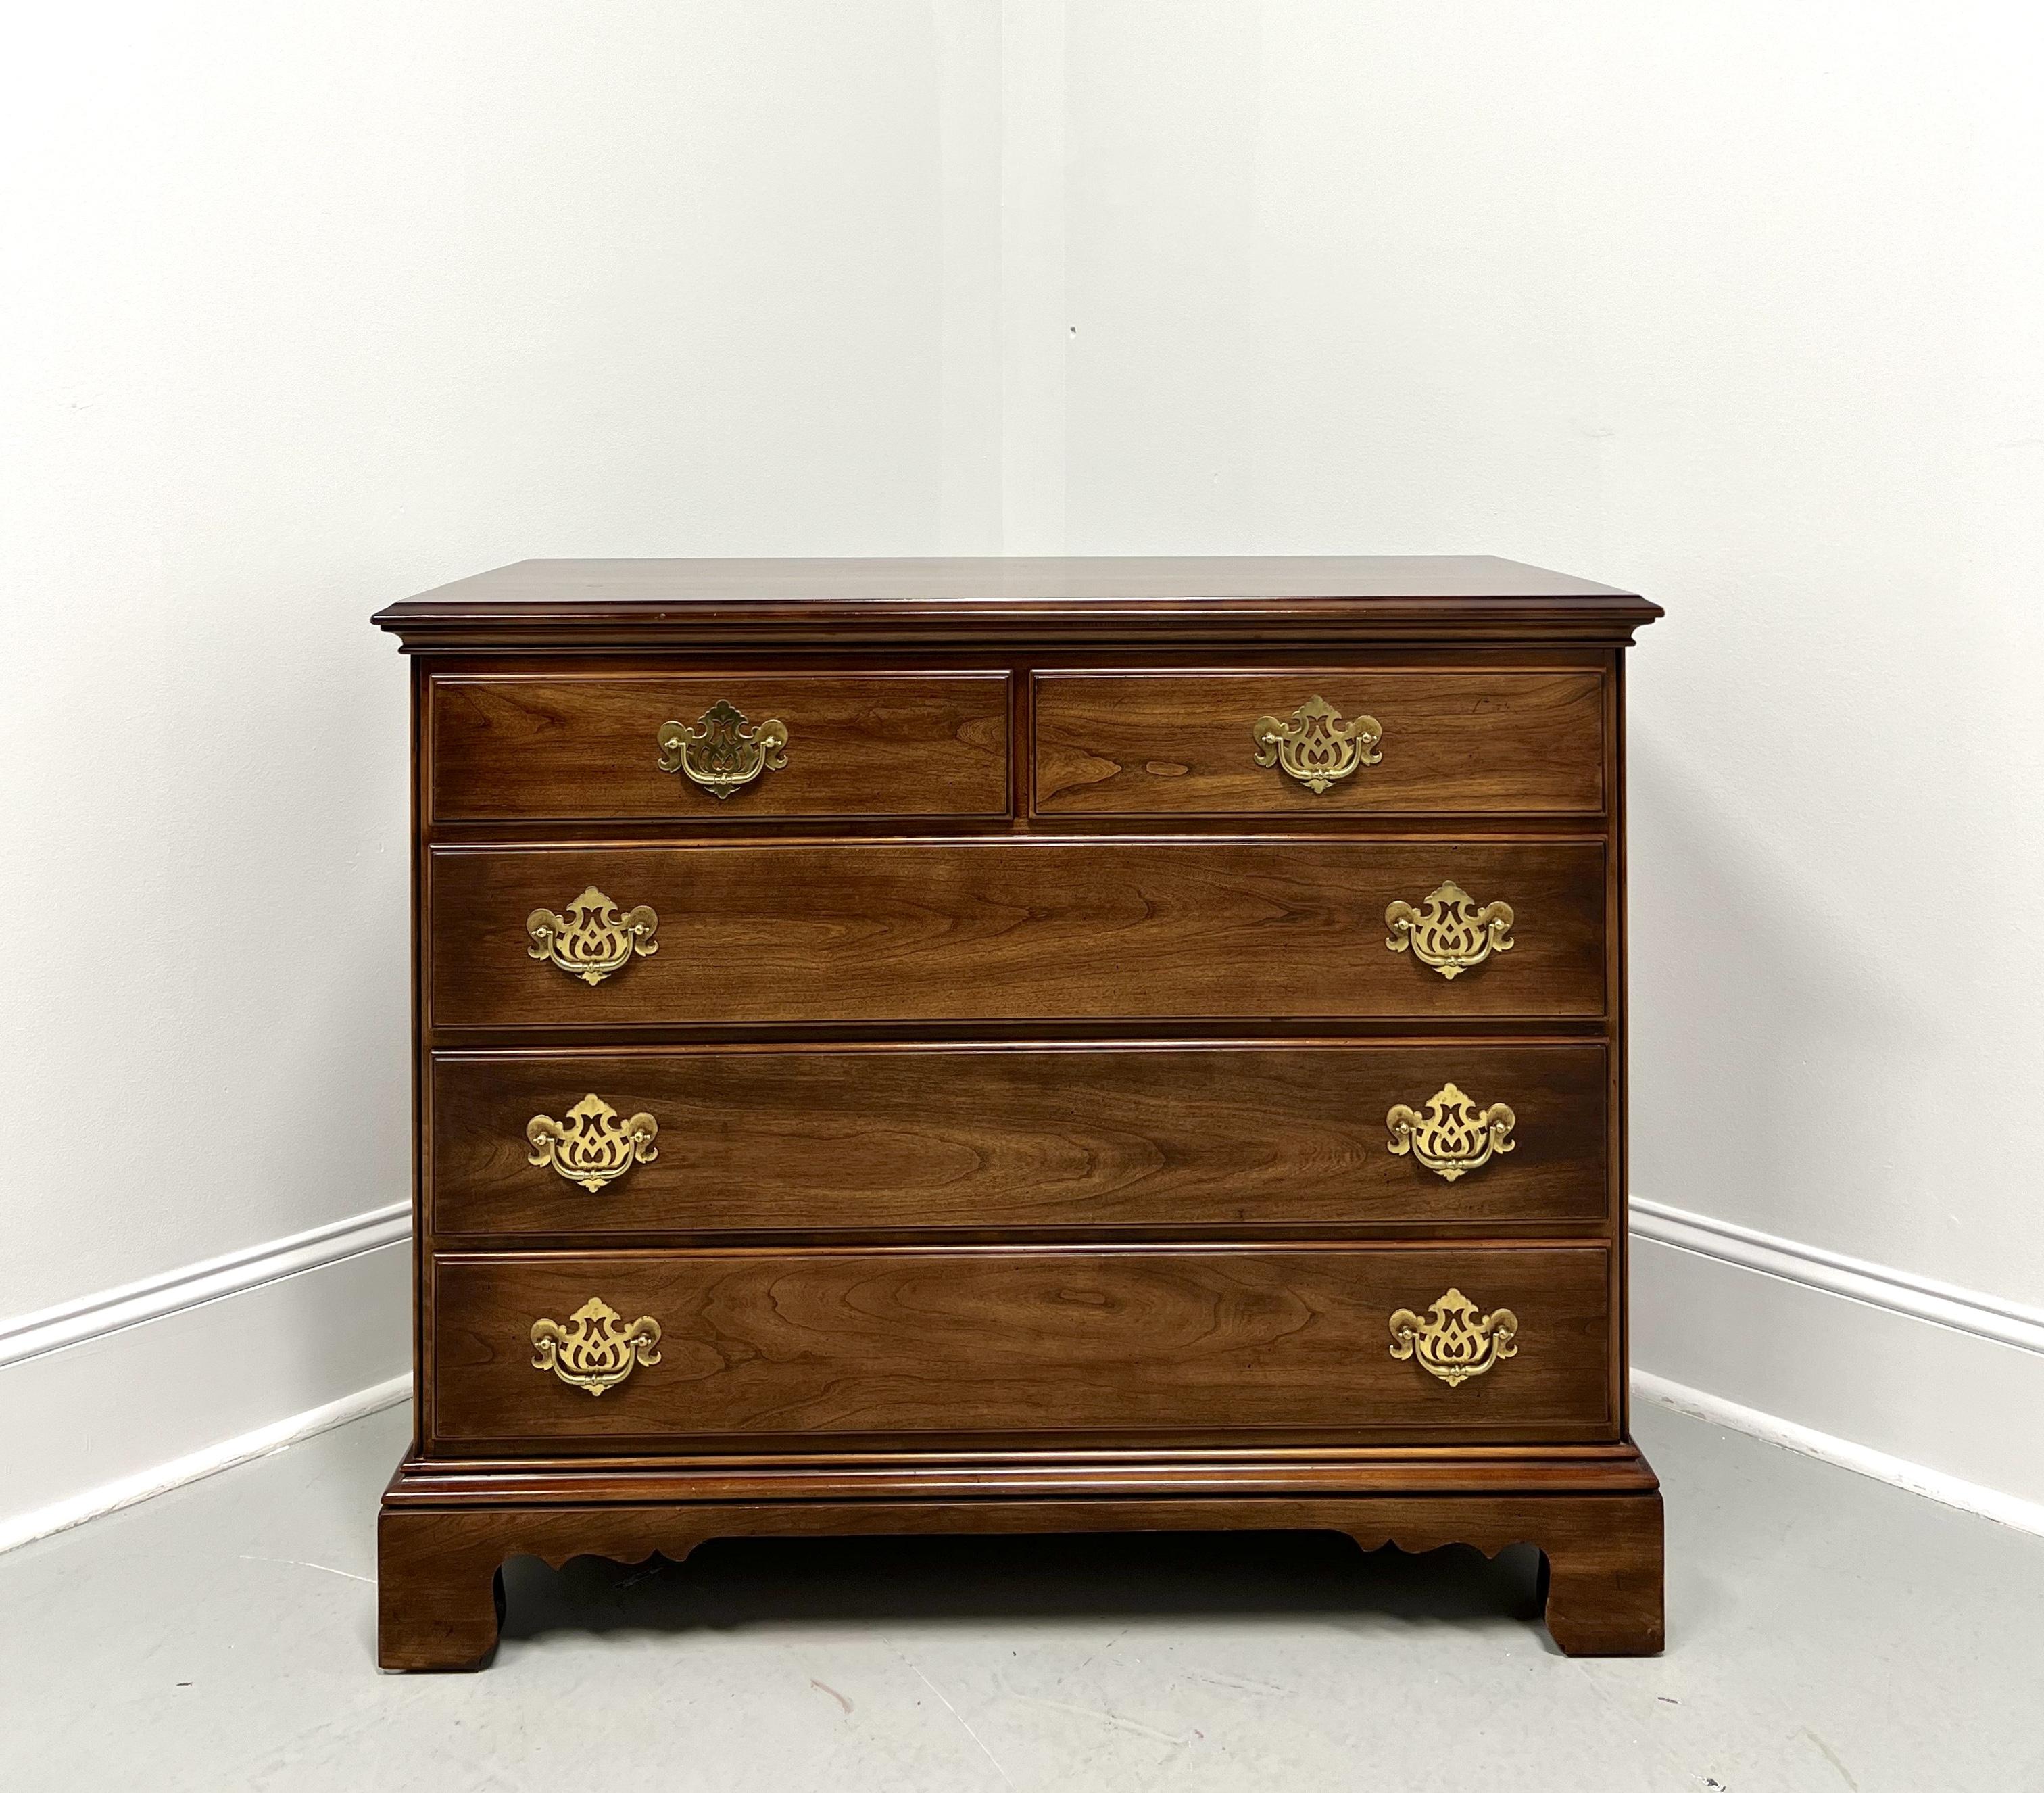 A Chippendale style bachelor chest by Statton Furniture, from their Trutype Americana line. Solid cherry wood with their Oxford finish, bevel edge to the top, decorative brass hardware, and bracket feet. Features two smaller over three larger